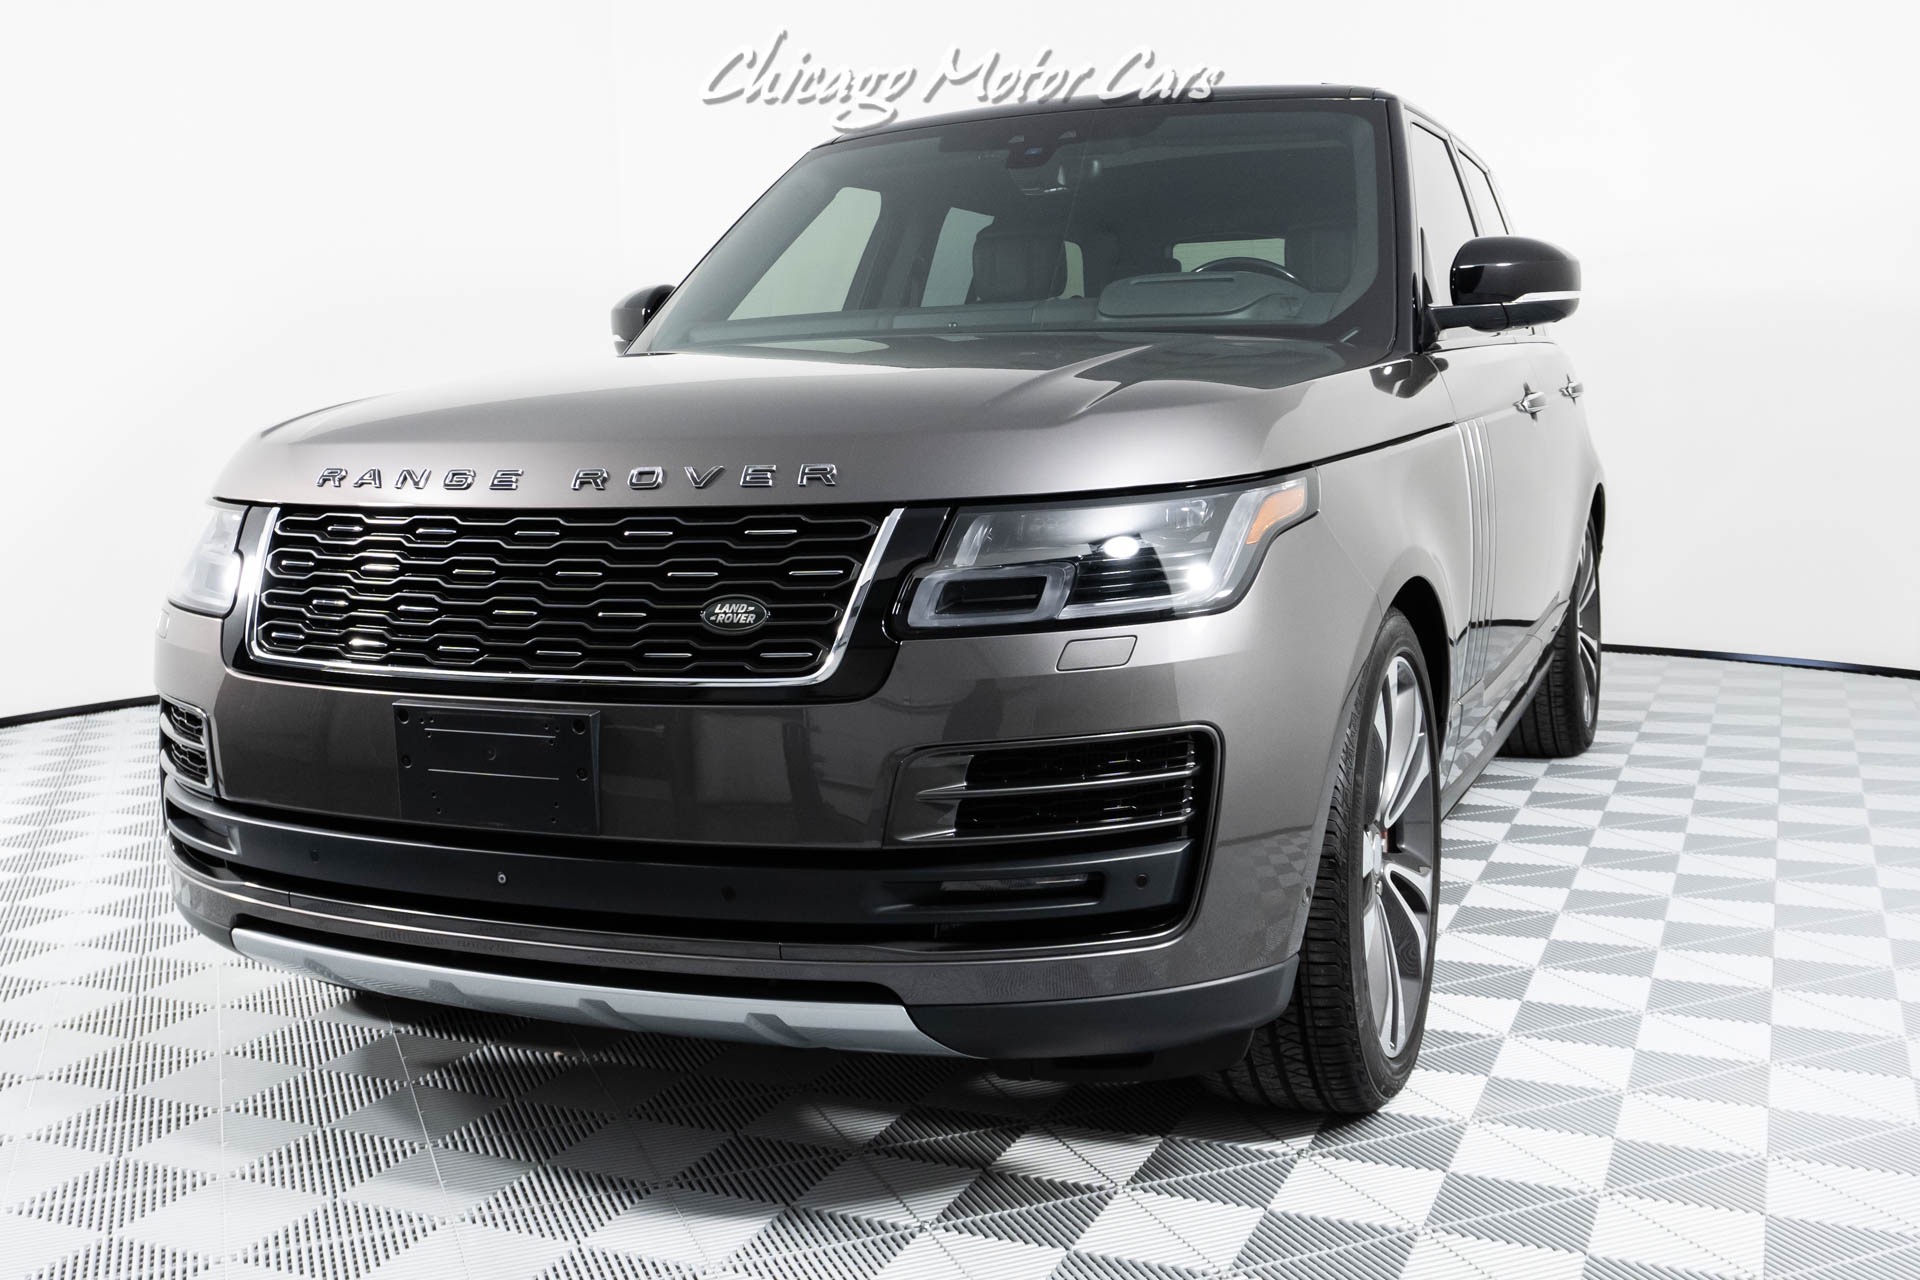 Used-2019-Land-Rover-Range-Rover-SV-Autobiography-Dynamic-Rare-SVO-Grey-LOADED